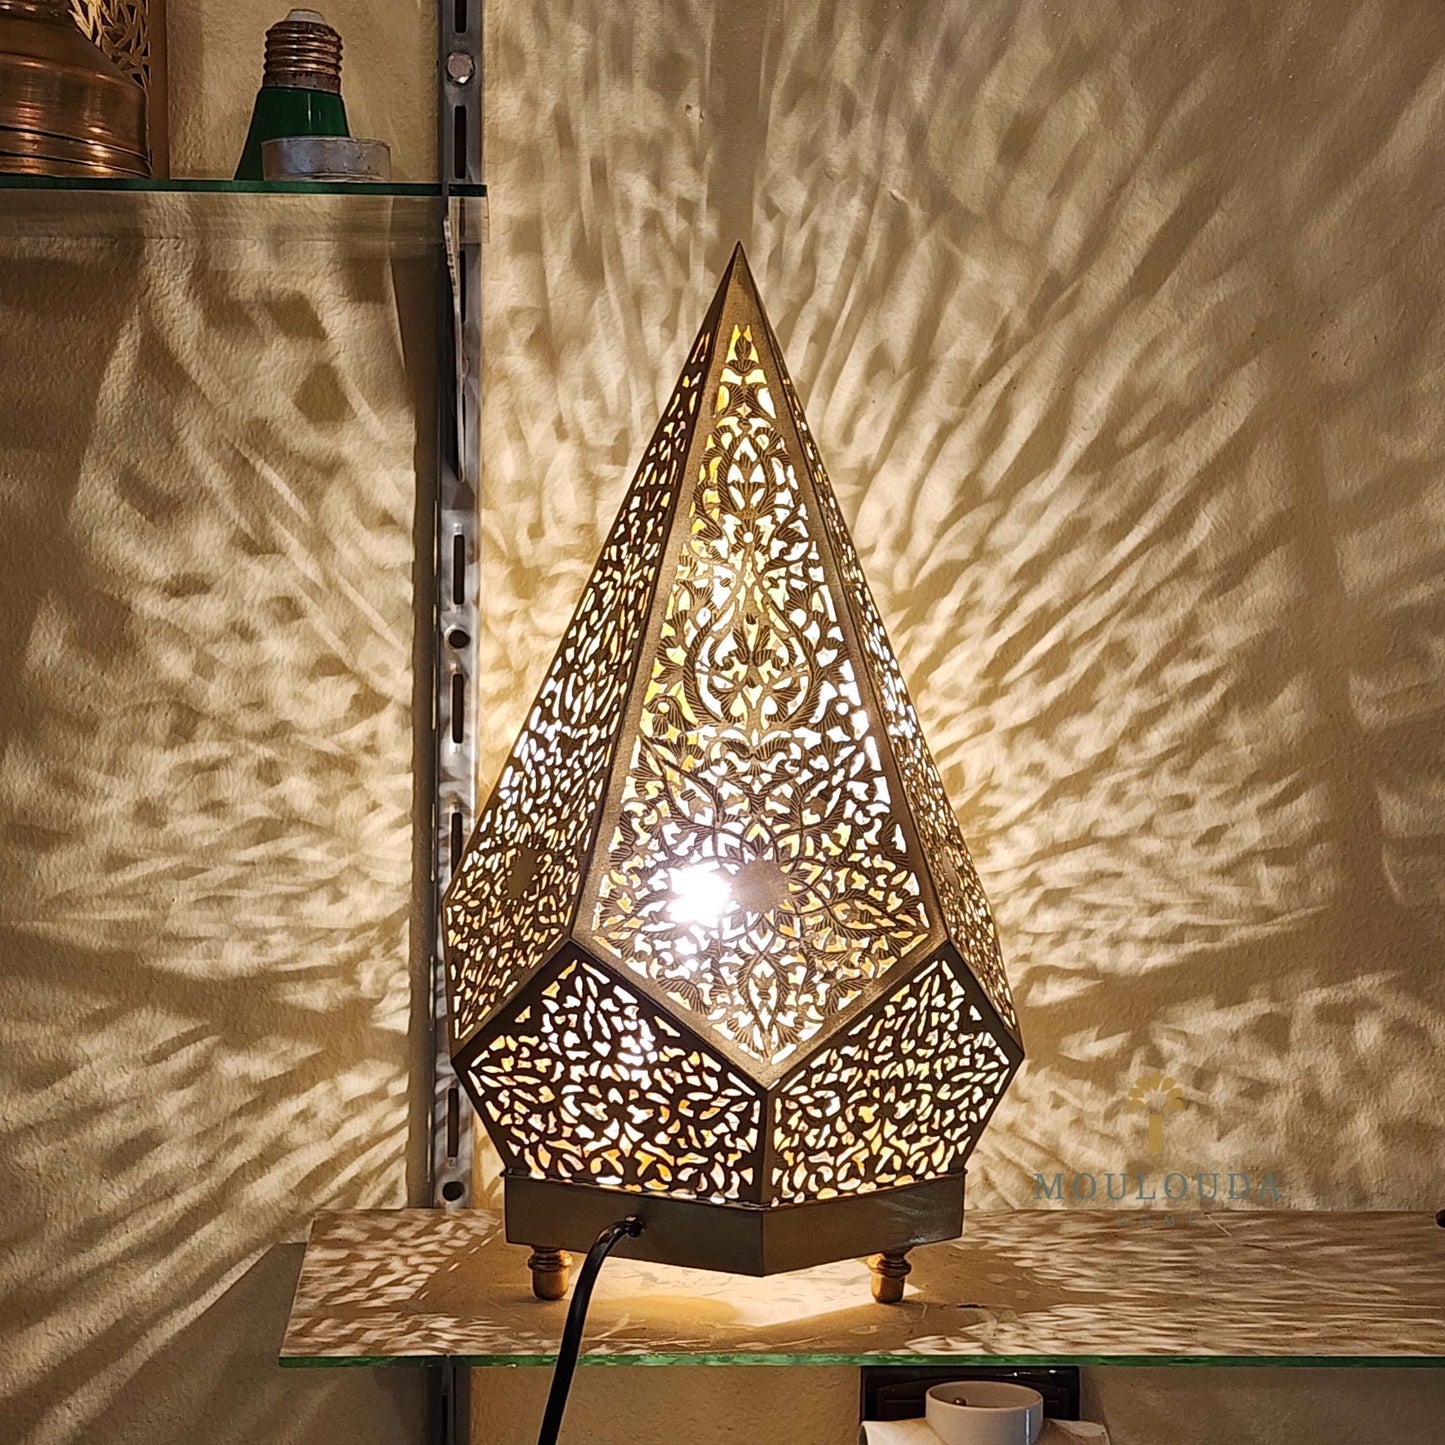 Handmade Moroccan Lamp - Luxury Standing/Table Lamp for Beautiful Moroccan Lighting - Mouloudahome